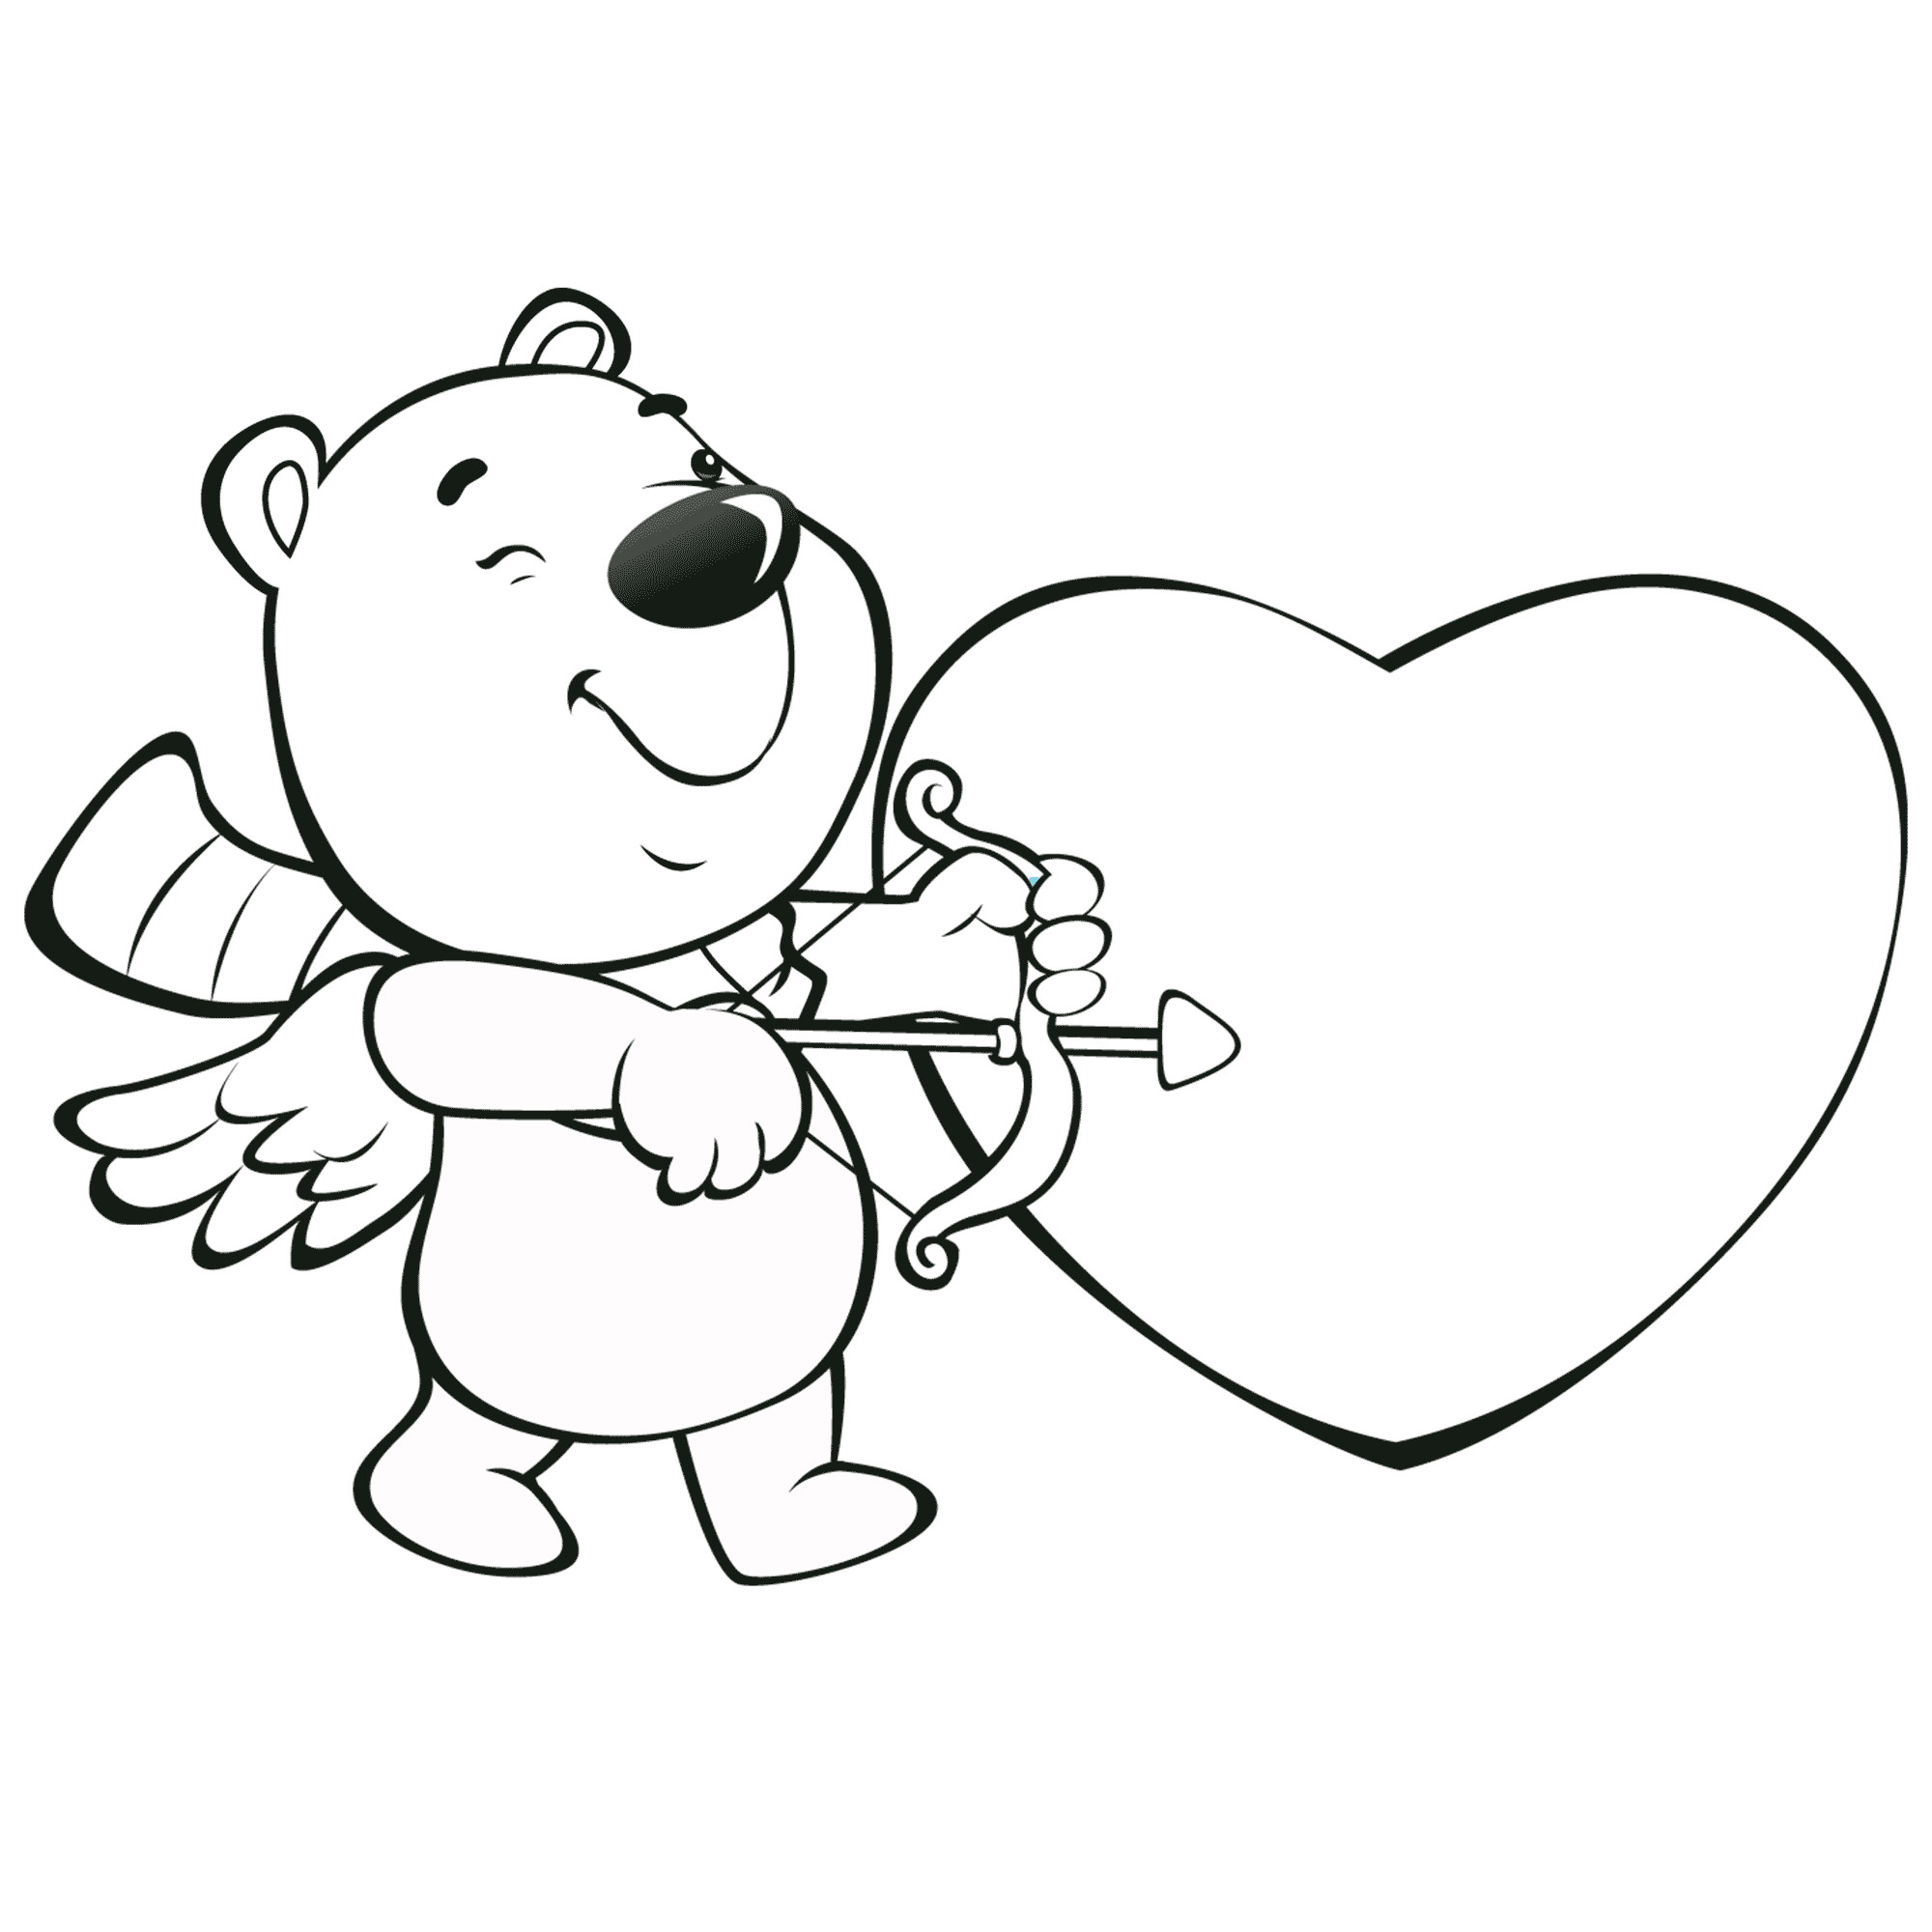 Valentine Coloring Sheets For Boys
 Valentine Coloring Pages Best Coloring Pages For Kids